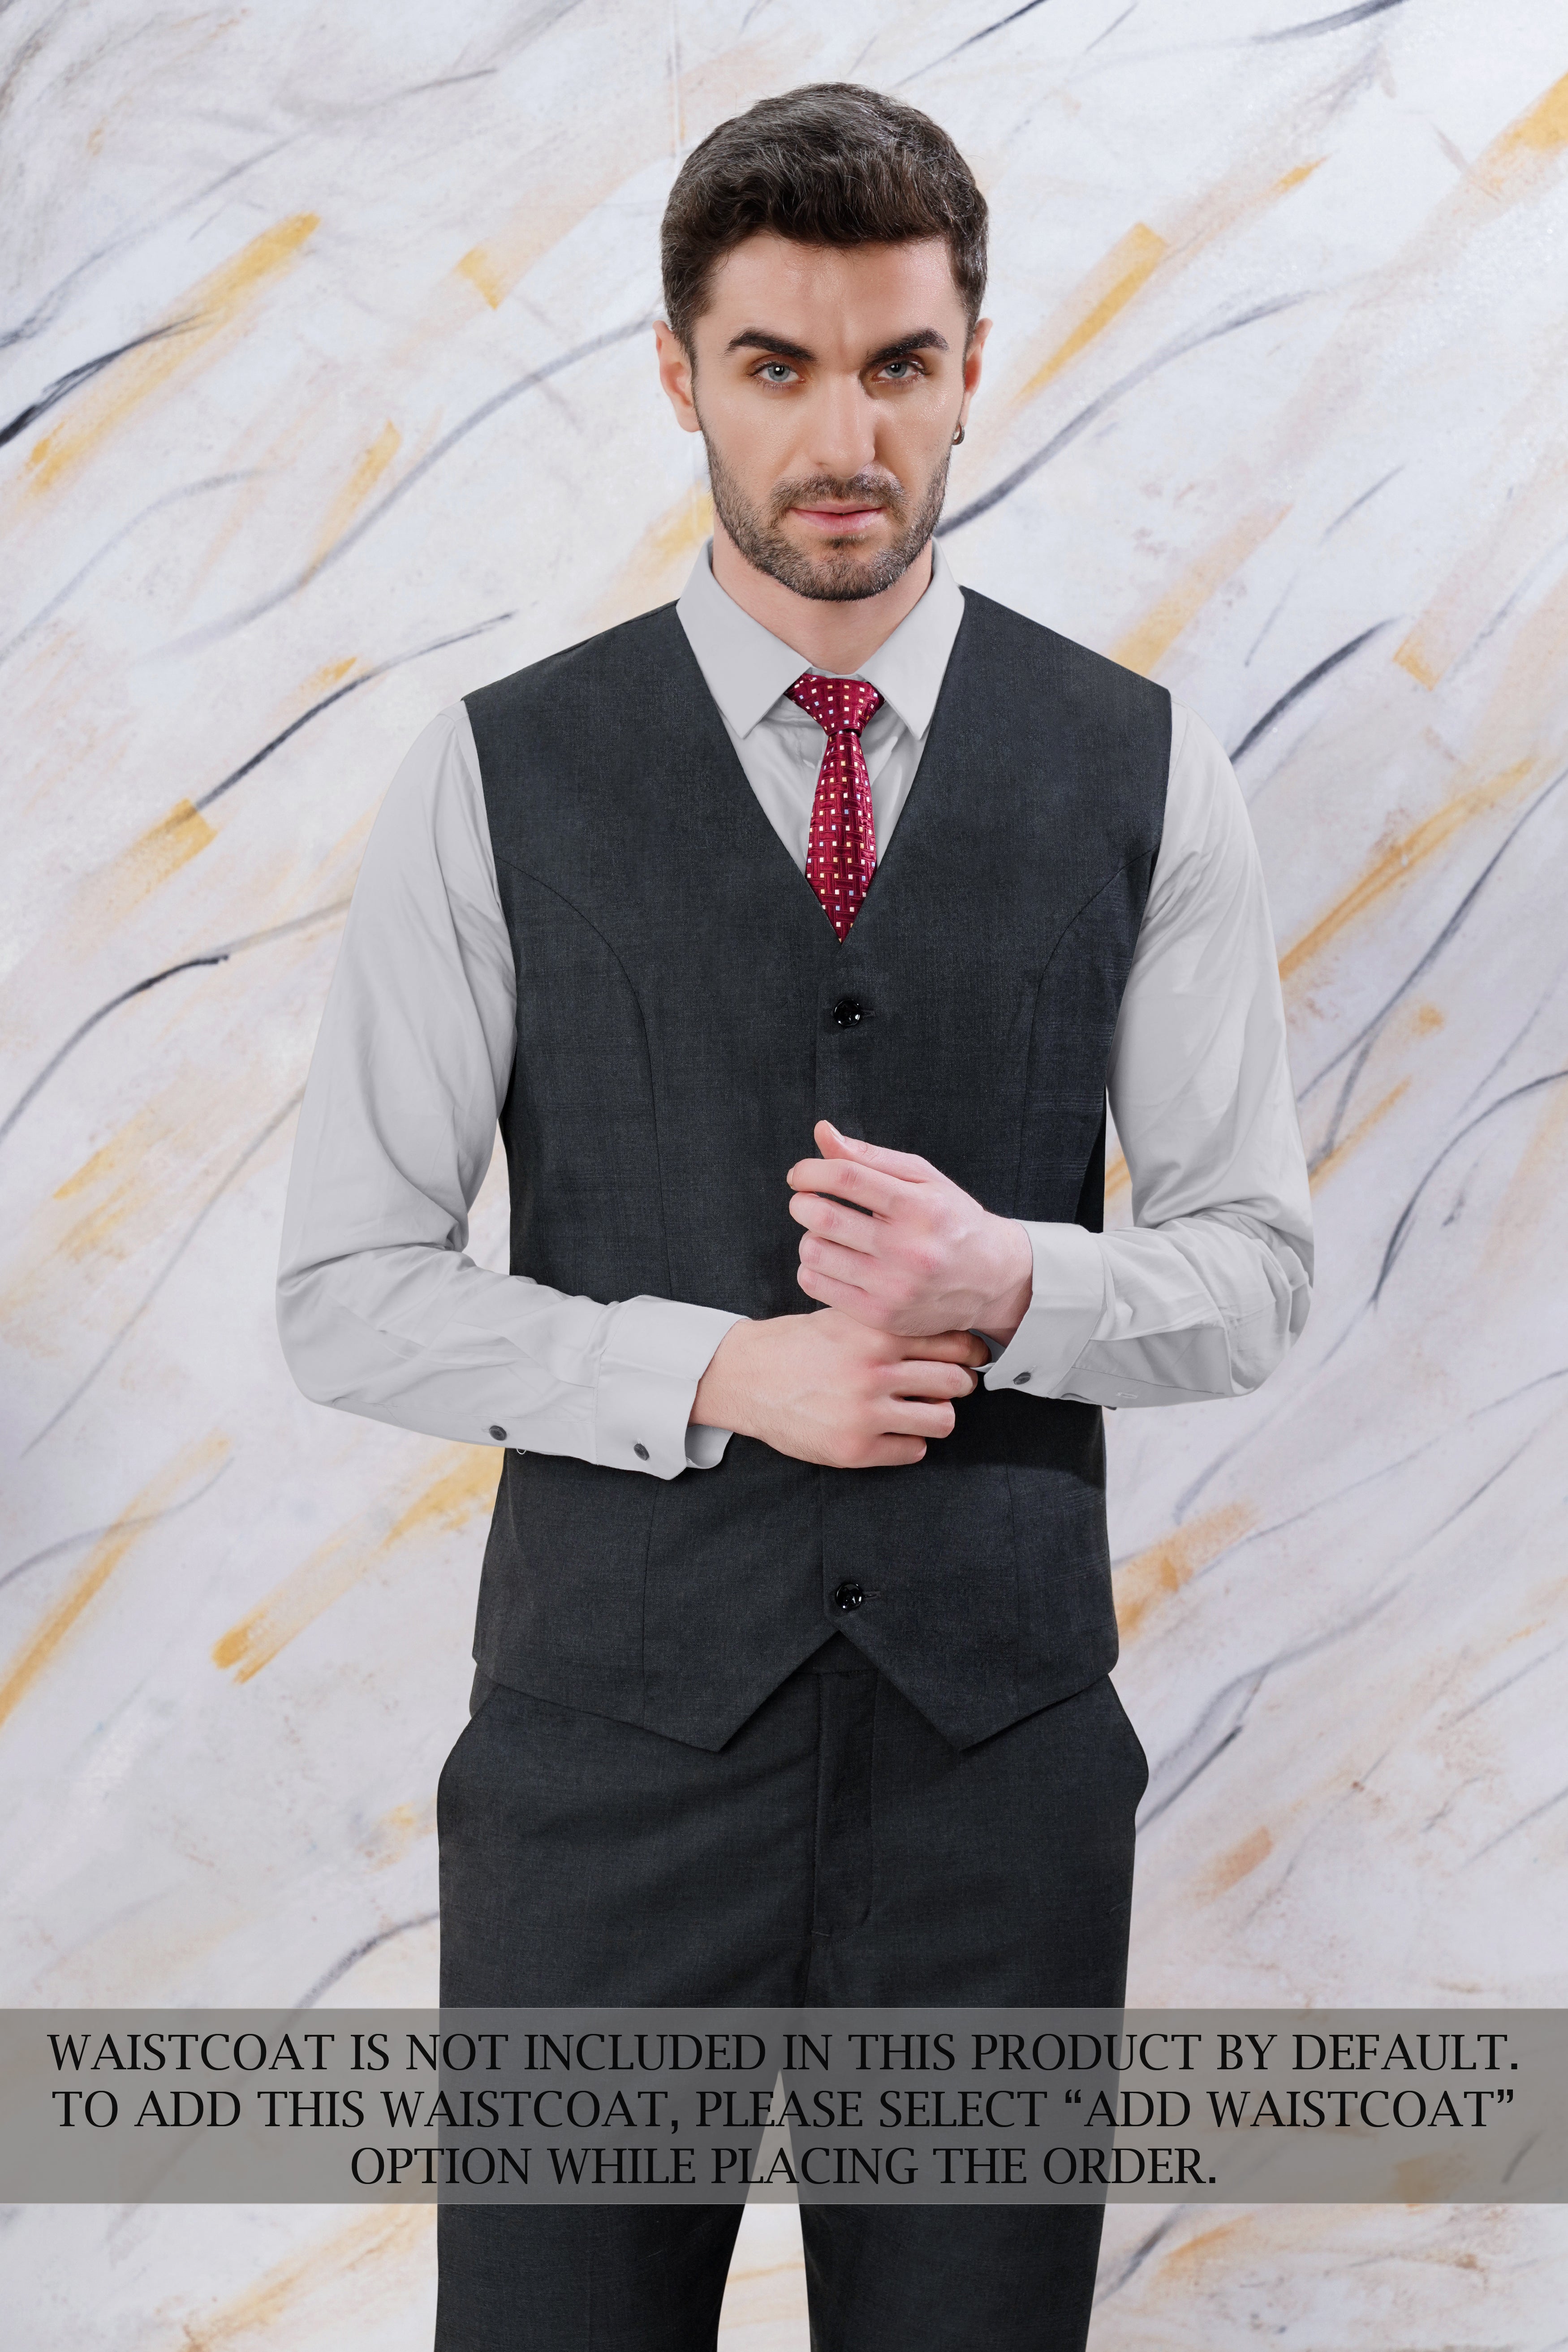 Thunder Gray Checkered Wool Rich Double Breasted Suit ST3093-DB-36, ST3093-DB-38, ST3093-DB-40, ST3093-DB-42, ST3093-DB-44, ST3093-DB-46, ST3093-DB-48, ST3093-DB-50, ST3093-DB-52, ST3093-DB-54, ST3093-DB-56, ST3093-DB-58, ST3093-DB-60